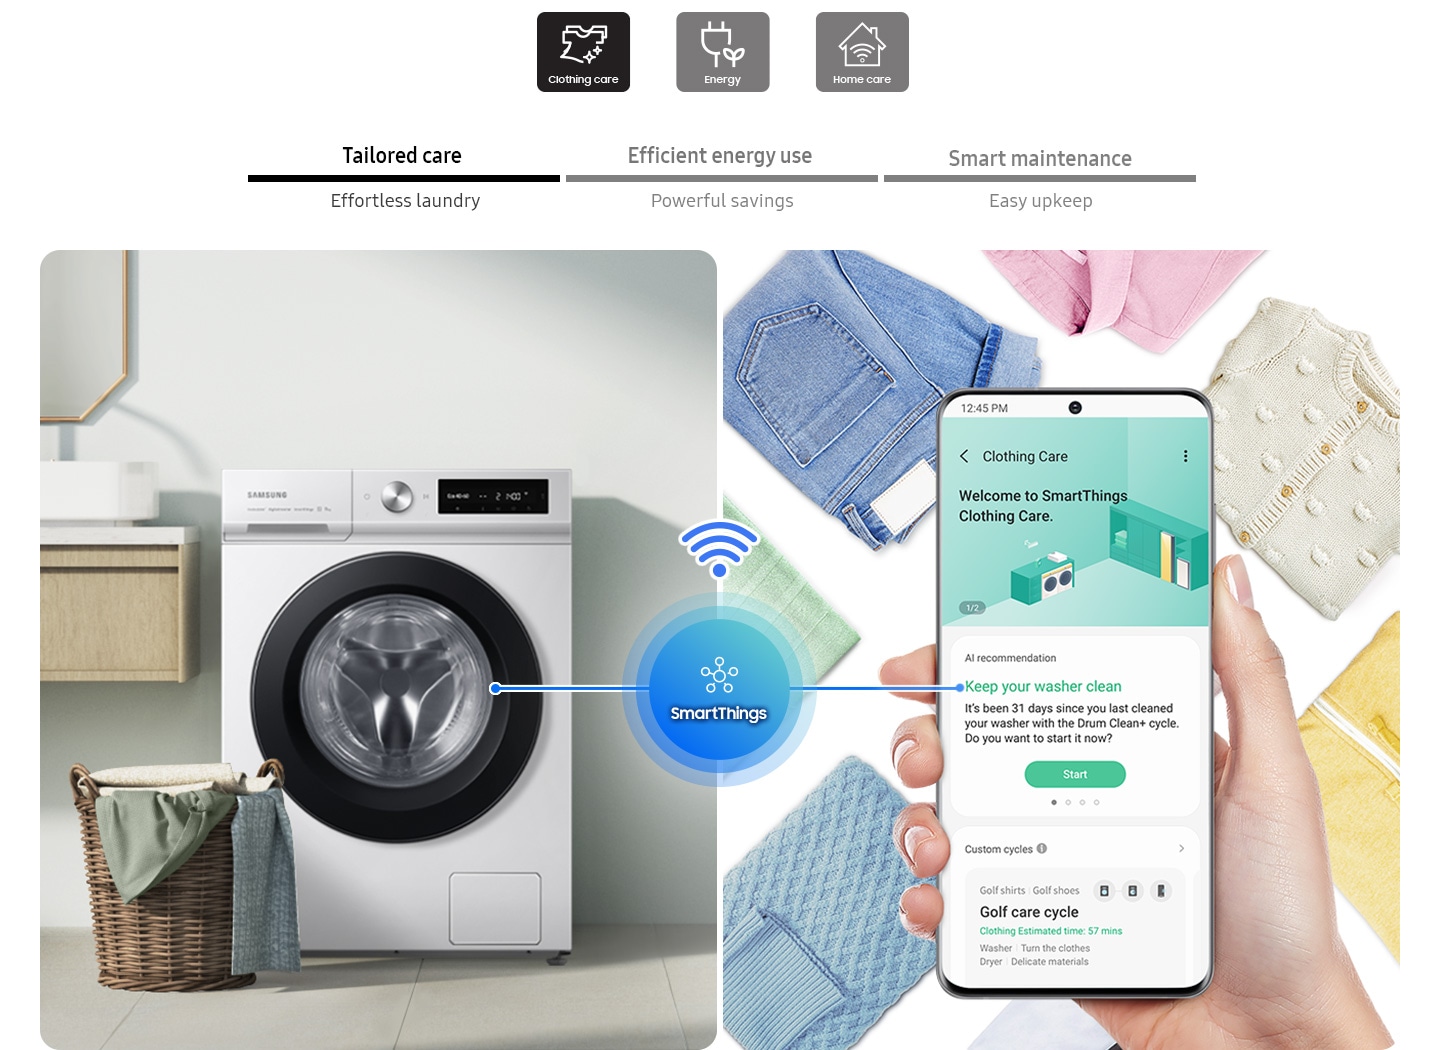 The SmartThings app helps Tailored care, Efficient energy use, Smart maintenance. Clothing Care displays AI recommendations for effortless laundry, Energy notifies best rates based on personal usage for powerful saving, Home Care help easy upkeep the washing machine maintenance.